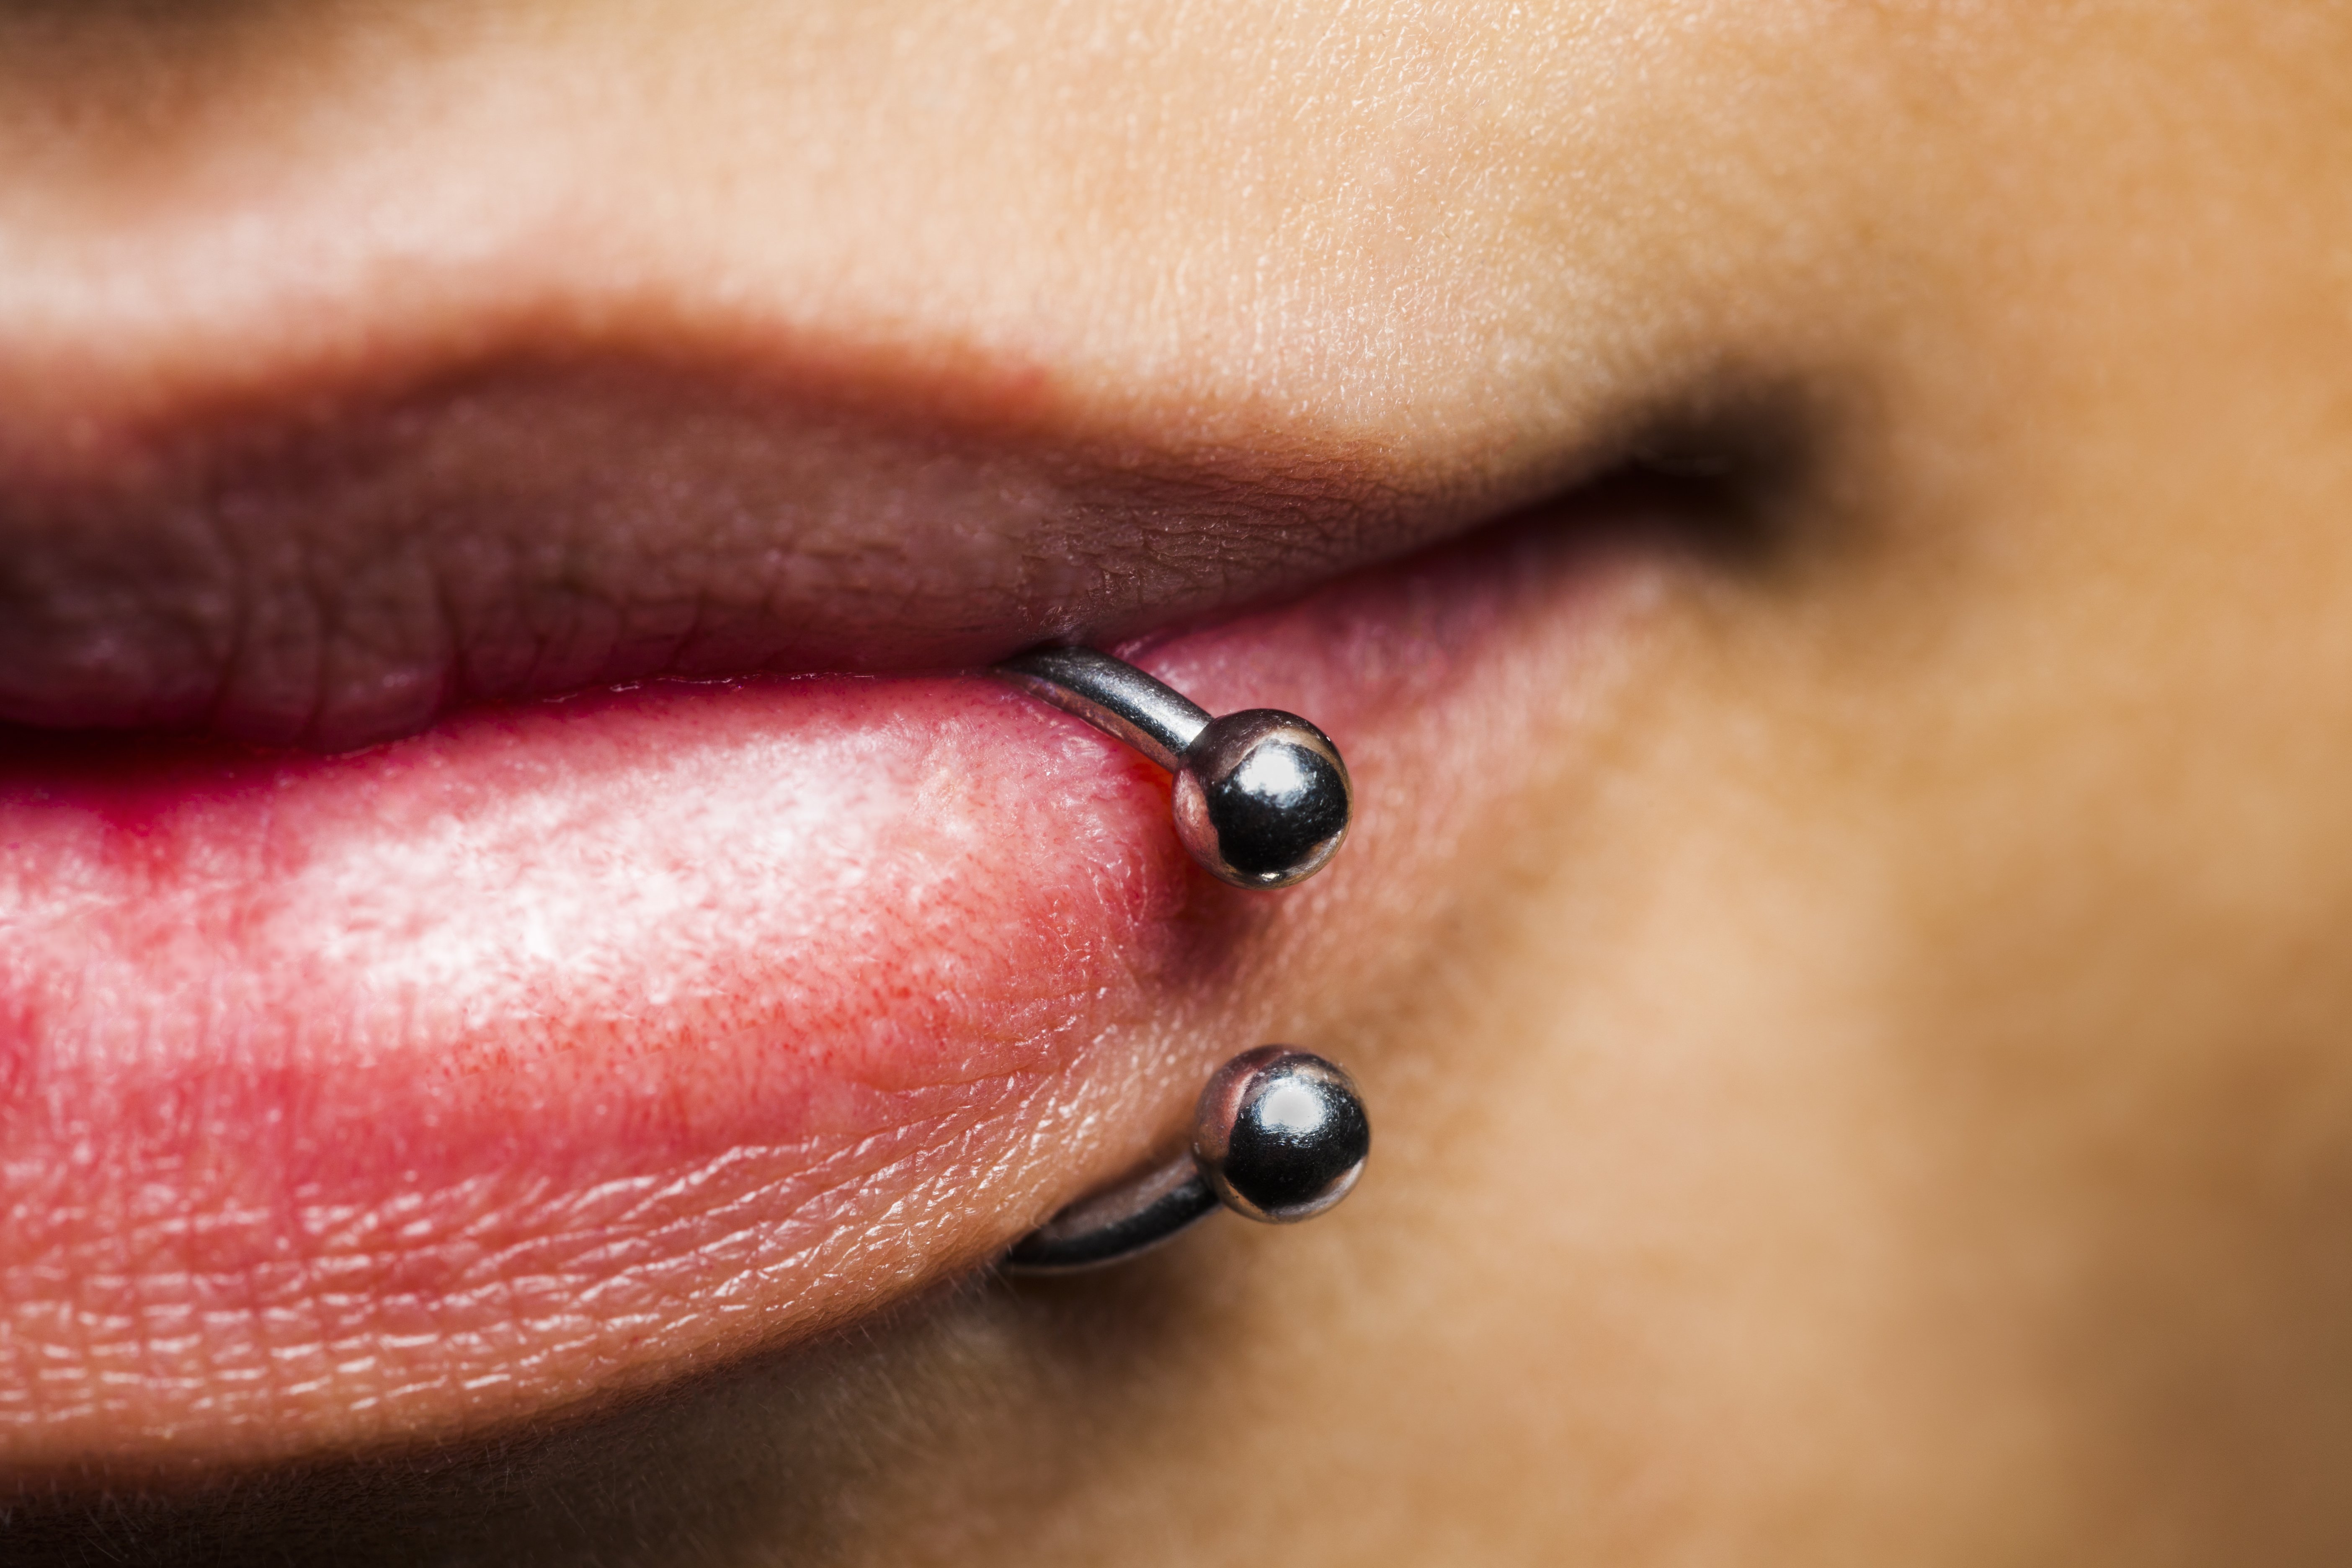 Woman with snake bite piercing | Source: Getty Images